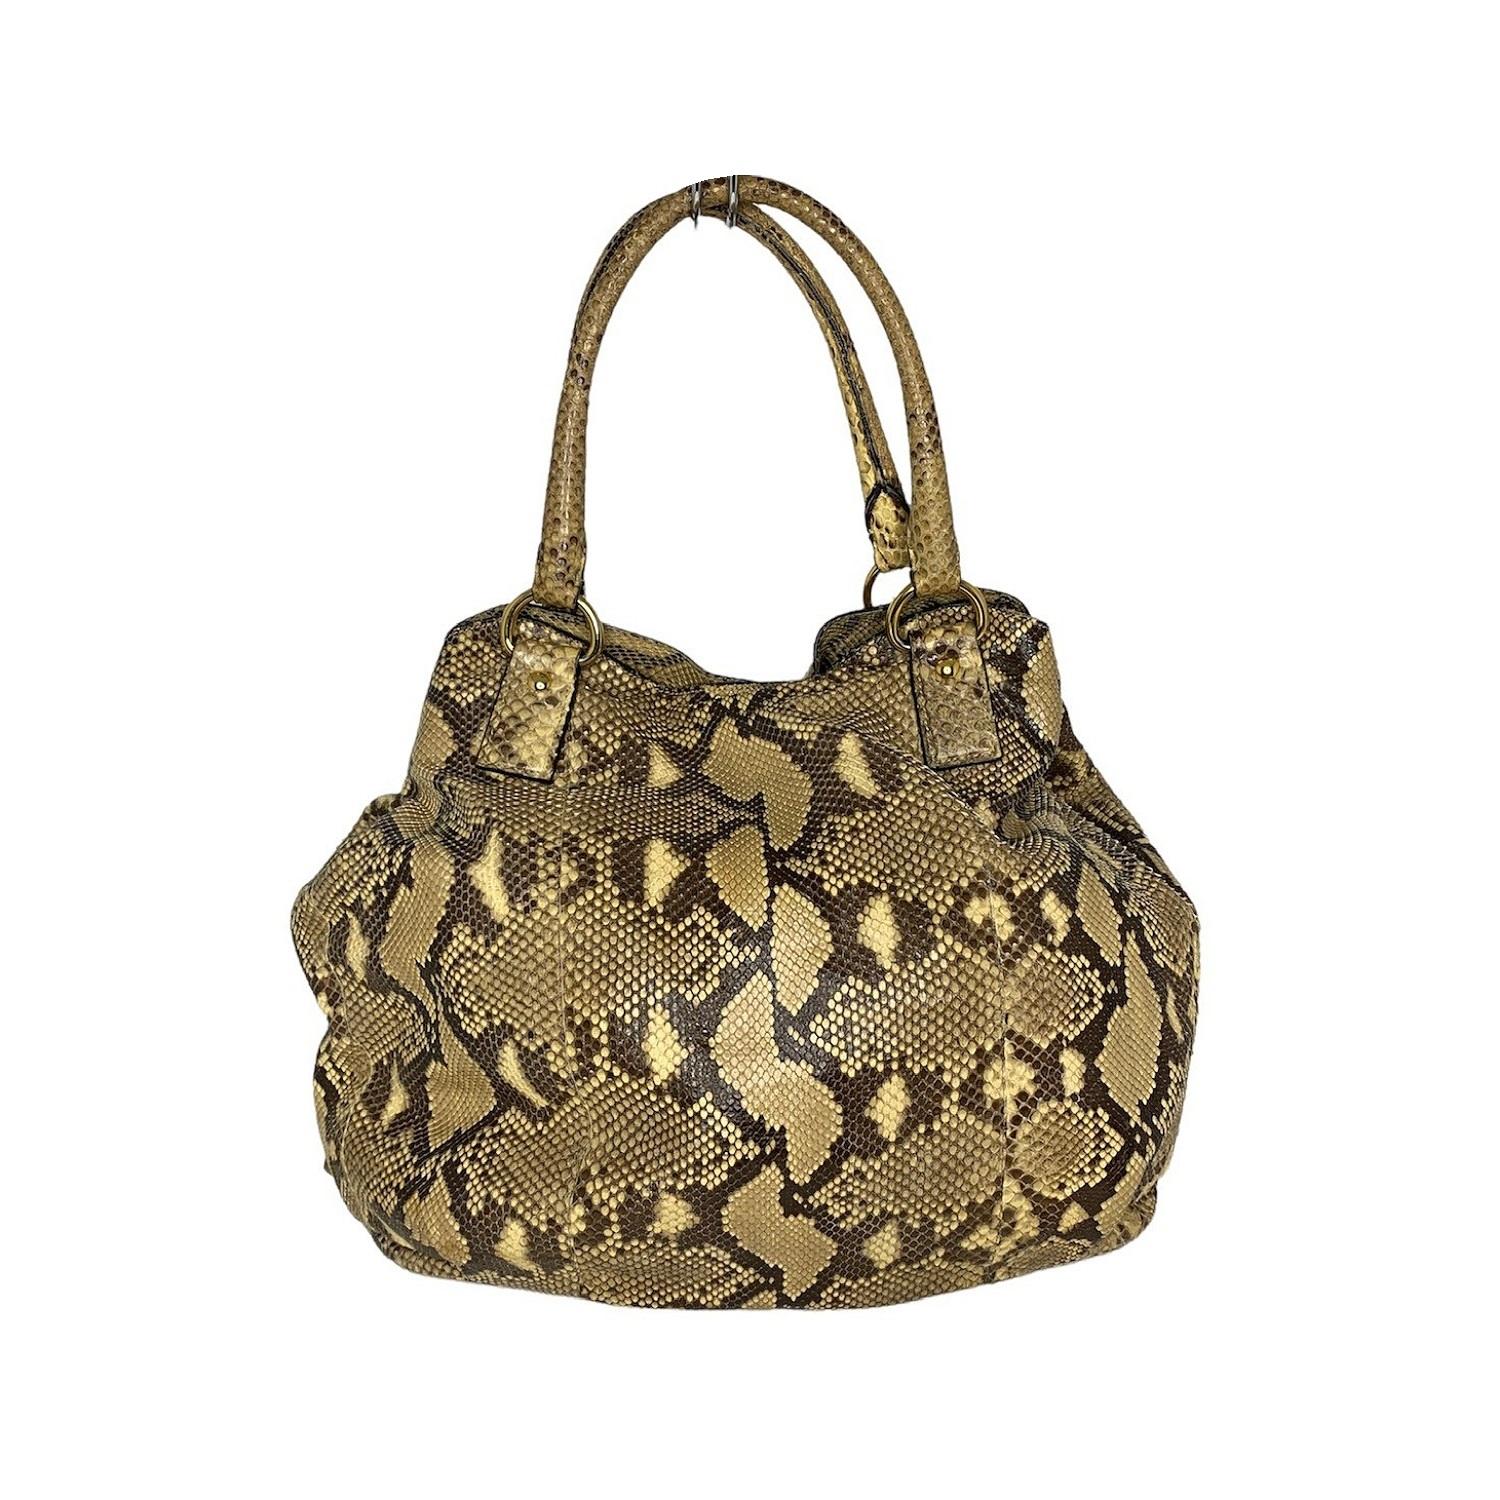 Brown and tan python PRADA satchel bag with gold-tone hardware, dual rolled shoulder straps, PRADA triangle name plate at exterior side, spacious interior, tonal leather lining, one zipped pocket at interior wall and magnetic snap closure at